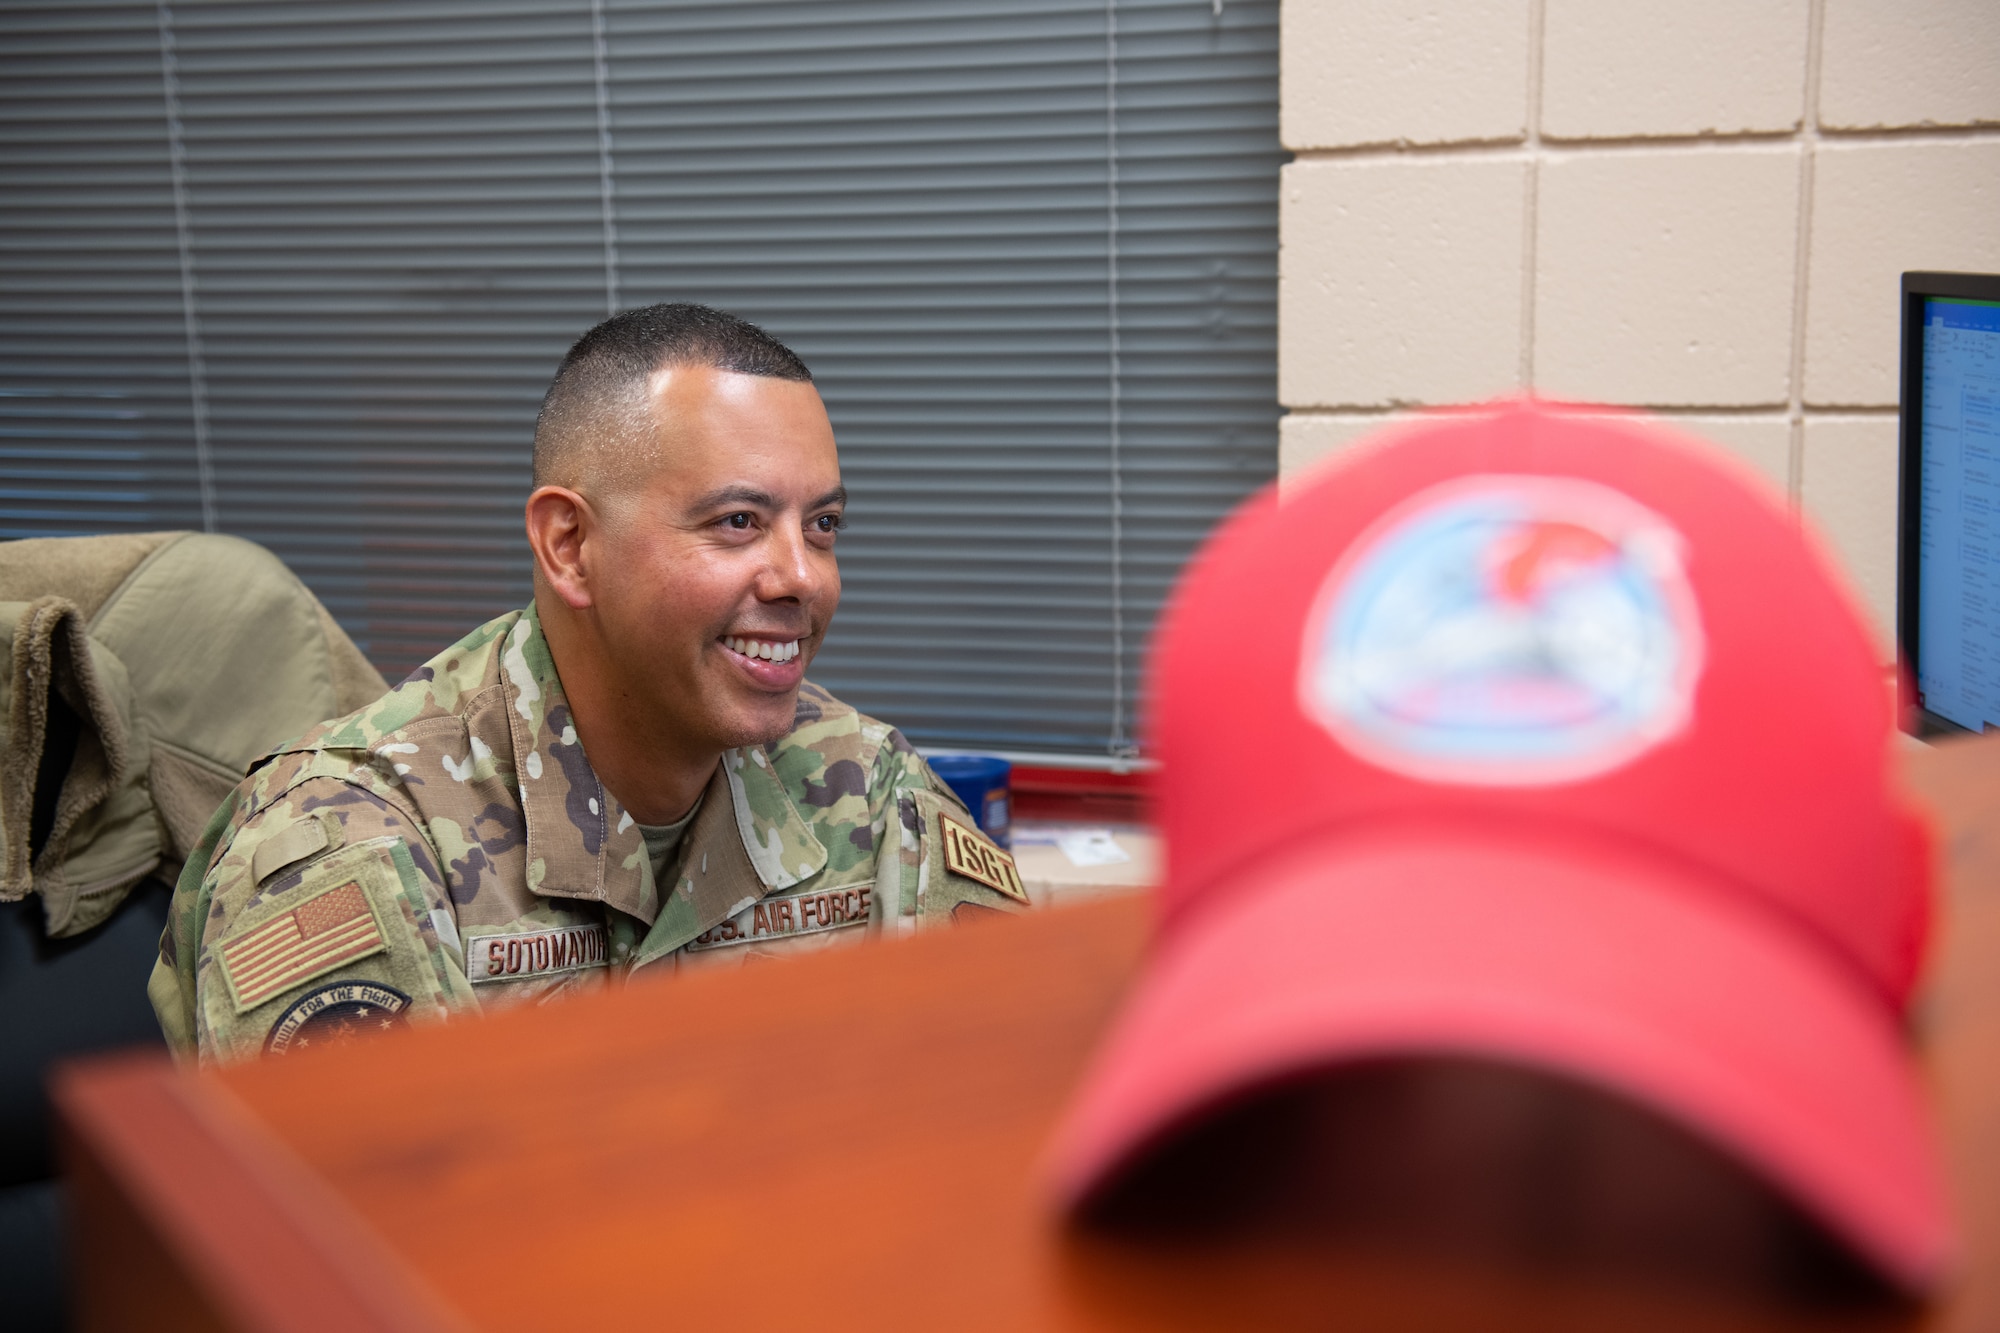 U.S. Air Force Senior Master Sgt. Jonathan Sotomayor, 1st Sgt. of the 202nd Rapid Engineer Deployable Heavy Operational Repair Squadron Engineers, or RED HORSE, Florida Air National Guard, is pictured at the squadron's headquarters located at Camp Blanding Joint Training Center in Starke, FL, July 6, 2022. Sotomator was named the 2022 Outstanding 1st Sgt. of the Year for the Air National Guard and will be recognized during the ANG's Focus on the Force week in August 2022. (U.S. Air National Guard photo by Tech. Sgt. Chelsea Smith)